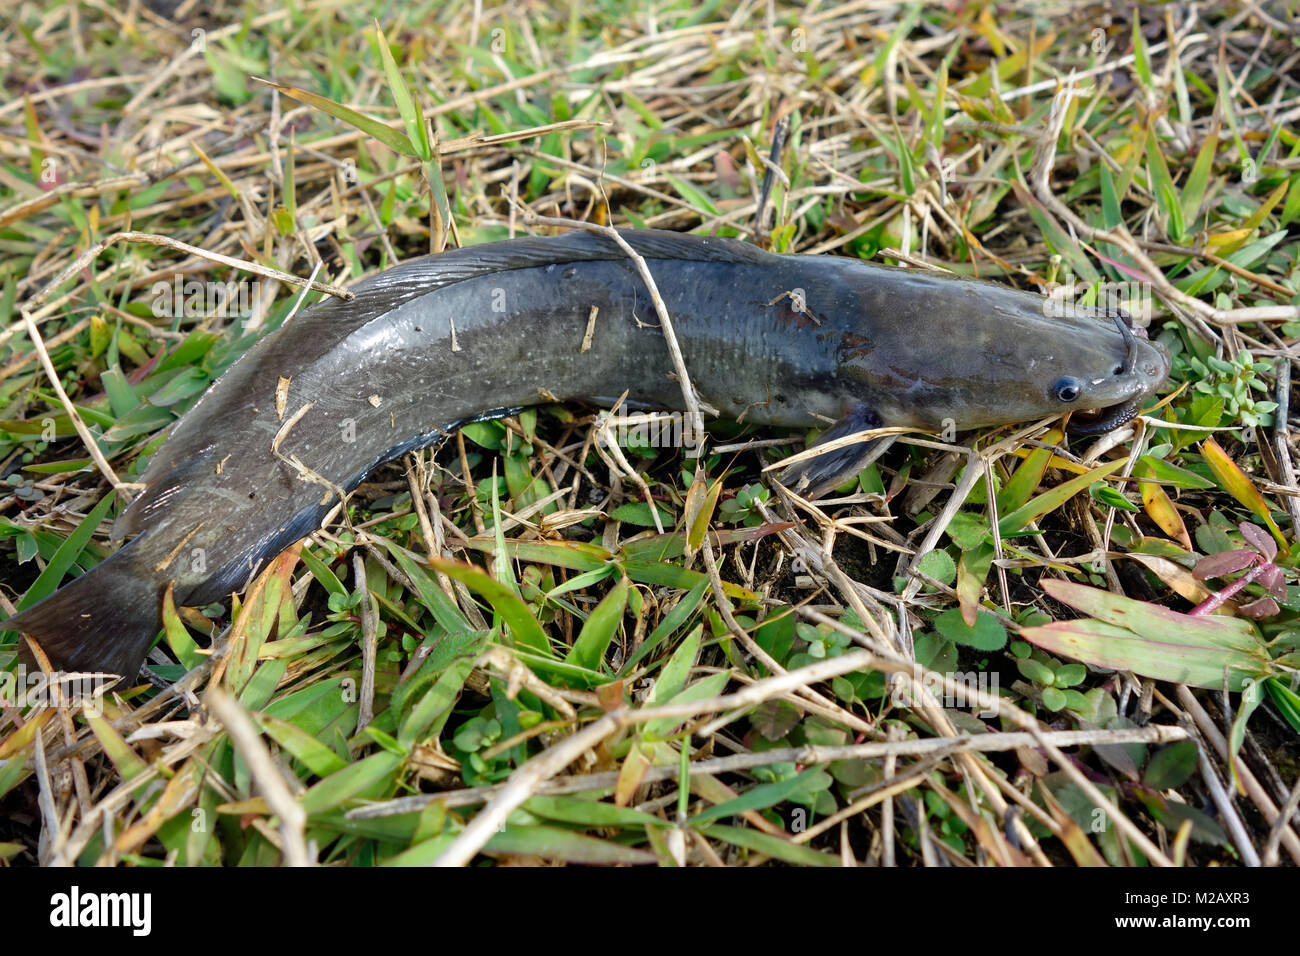 The walking catfish (Clarias batrachus) is a species of freshwater airbreathing catfish native to Southeast Asia. Stock Photo